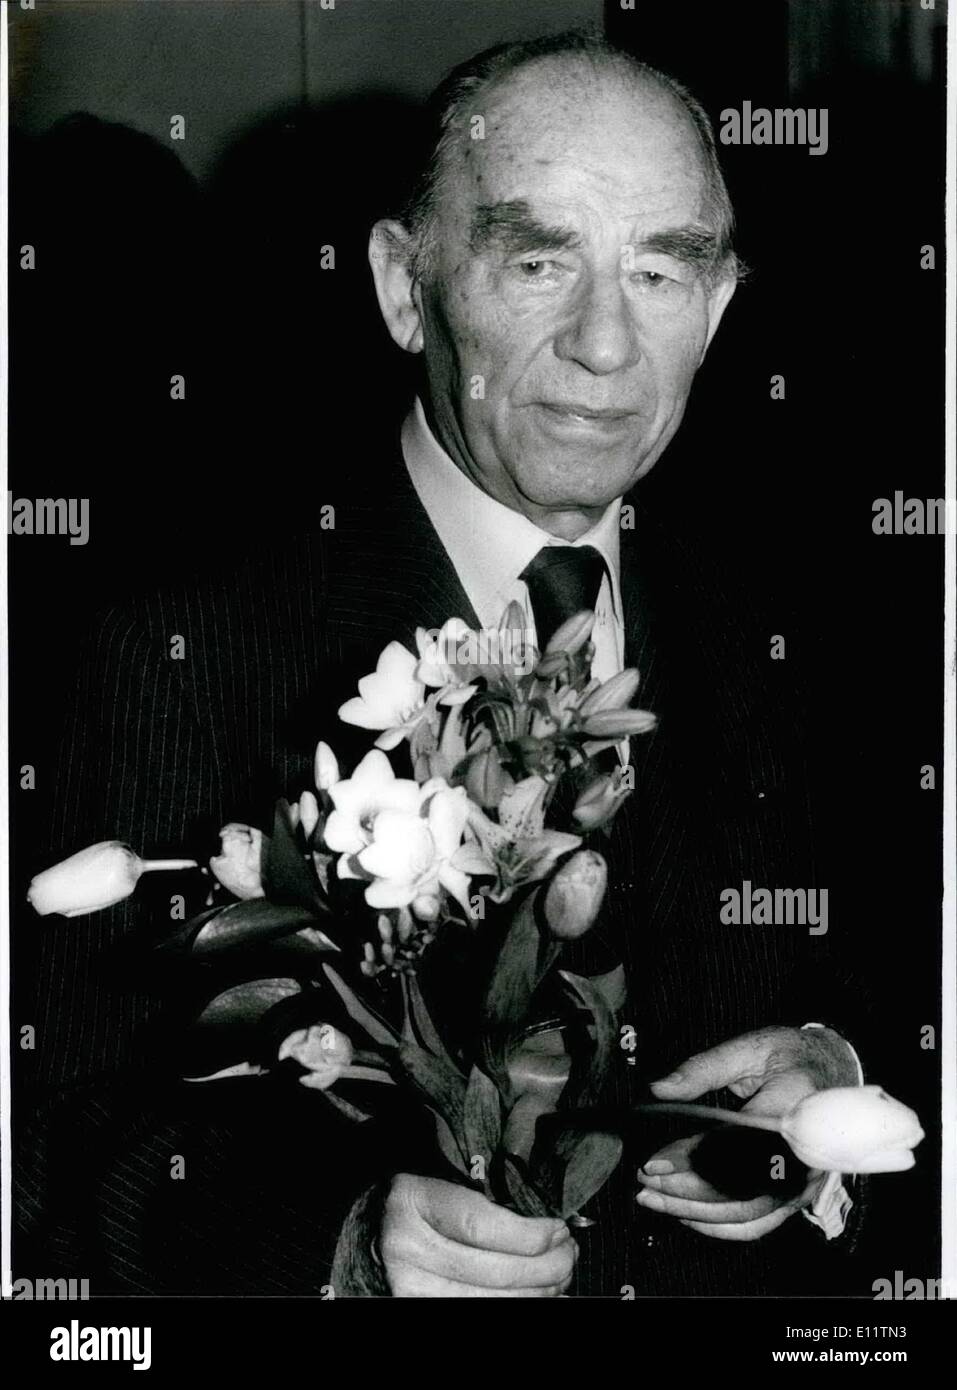 Jul. 07, 1980 - 80. Birthday of Arno Baker.: Flowers for the birthday - child.There are surely enough at July 19th,when Arno Baker ( Picture ) becomes 80 years old. The sculptor and graphic - artist who is famous wide over the frontiers of West - Germany, was born in Elber - feld / West - Germany and a pupil of Hubert Netzer, in the early twenties he came to Paris where he met Calder and Marc Chagall and where he found recognition by Maillol and Despiau with his first works. At the beginning of the Thirties Arno Baker returned on impulse of Max Liebermann to Germany Stock Photo